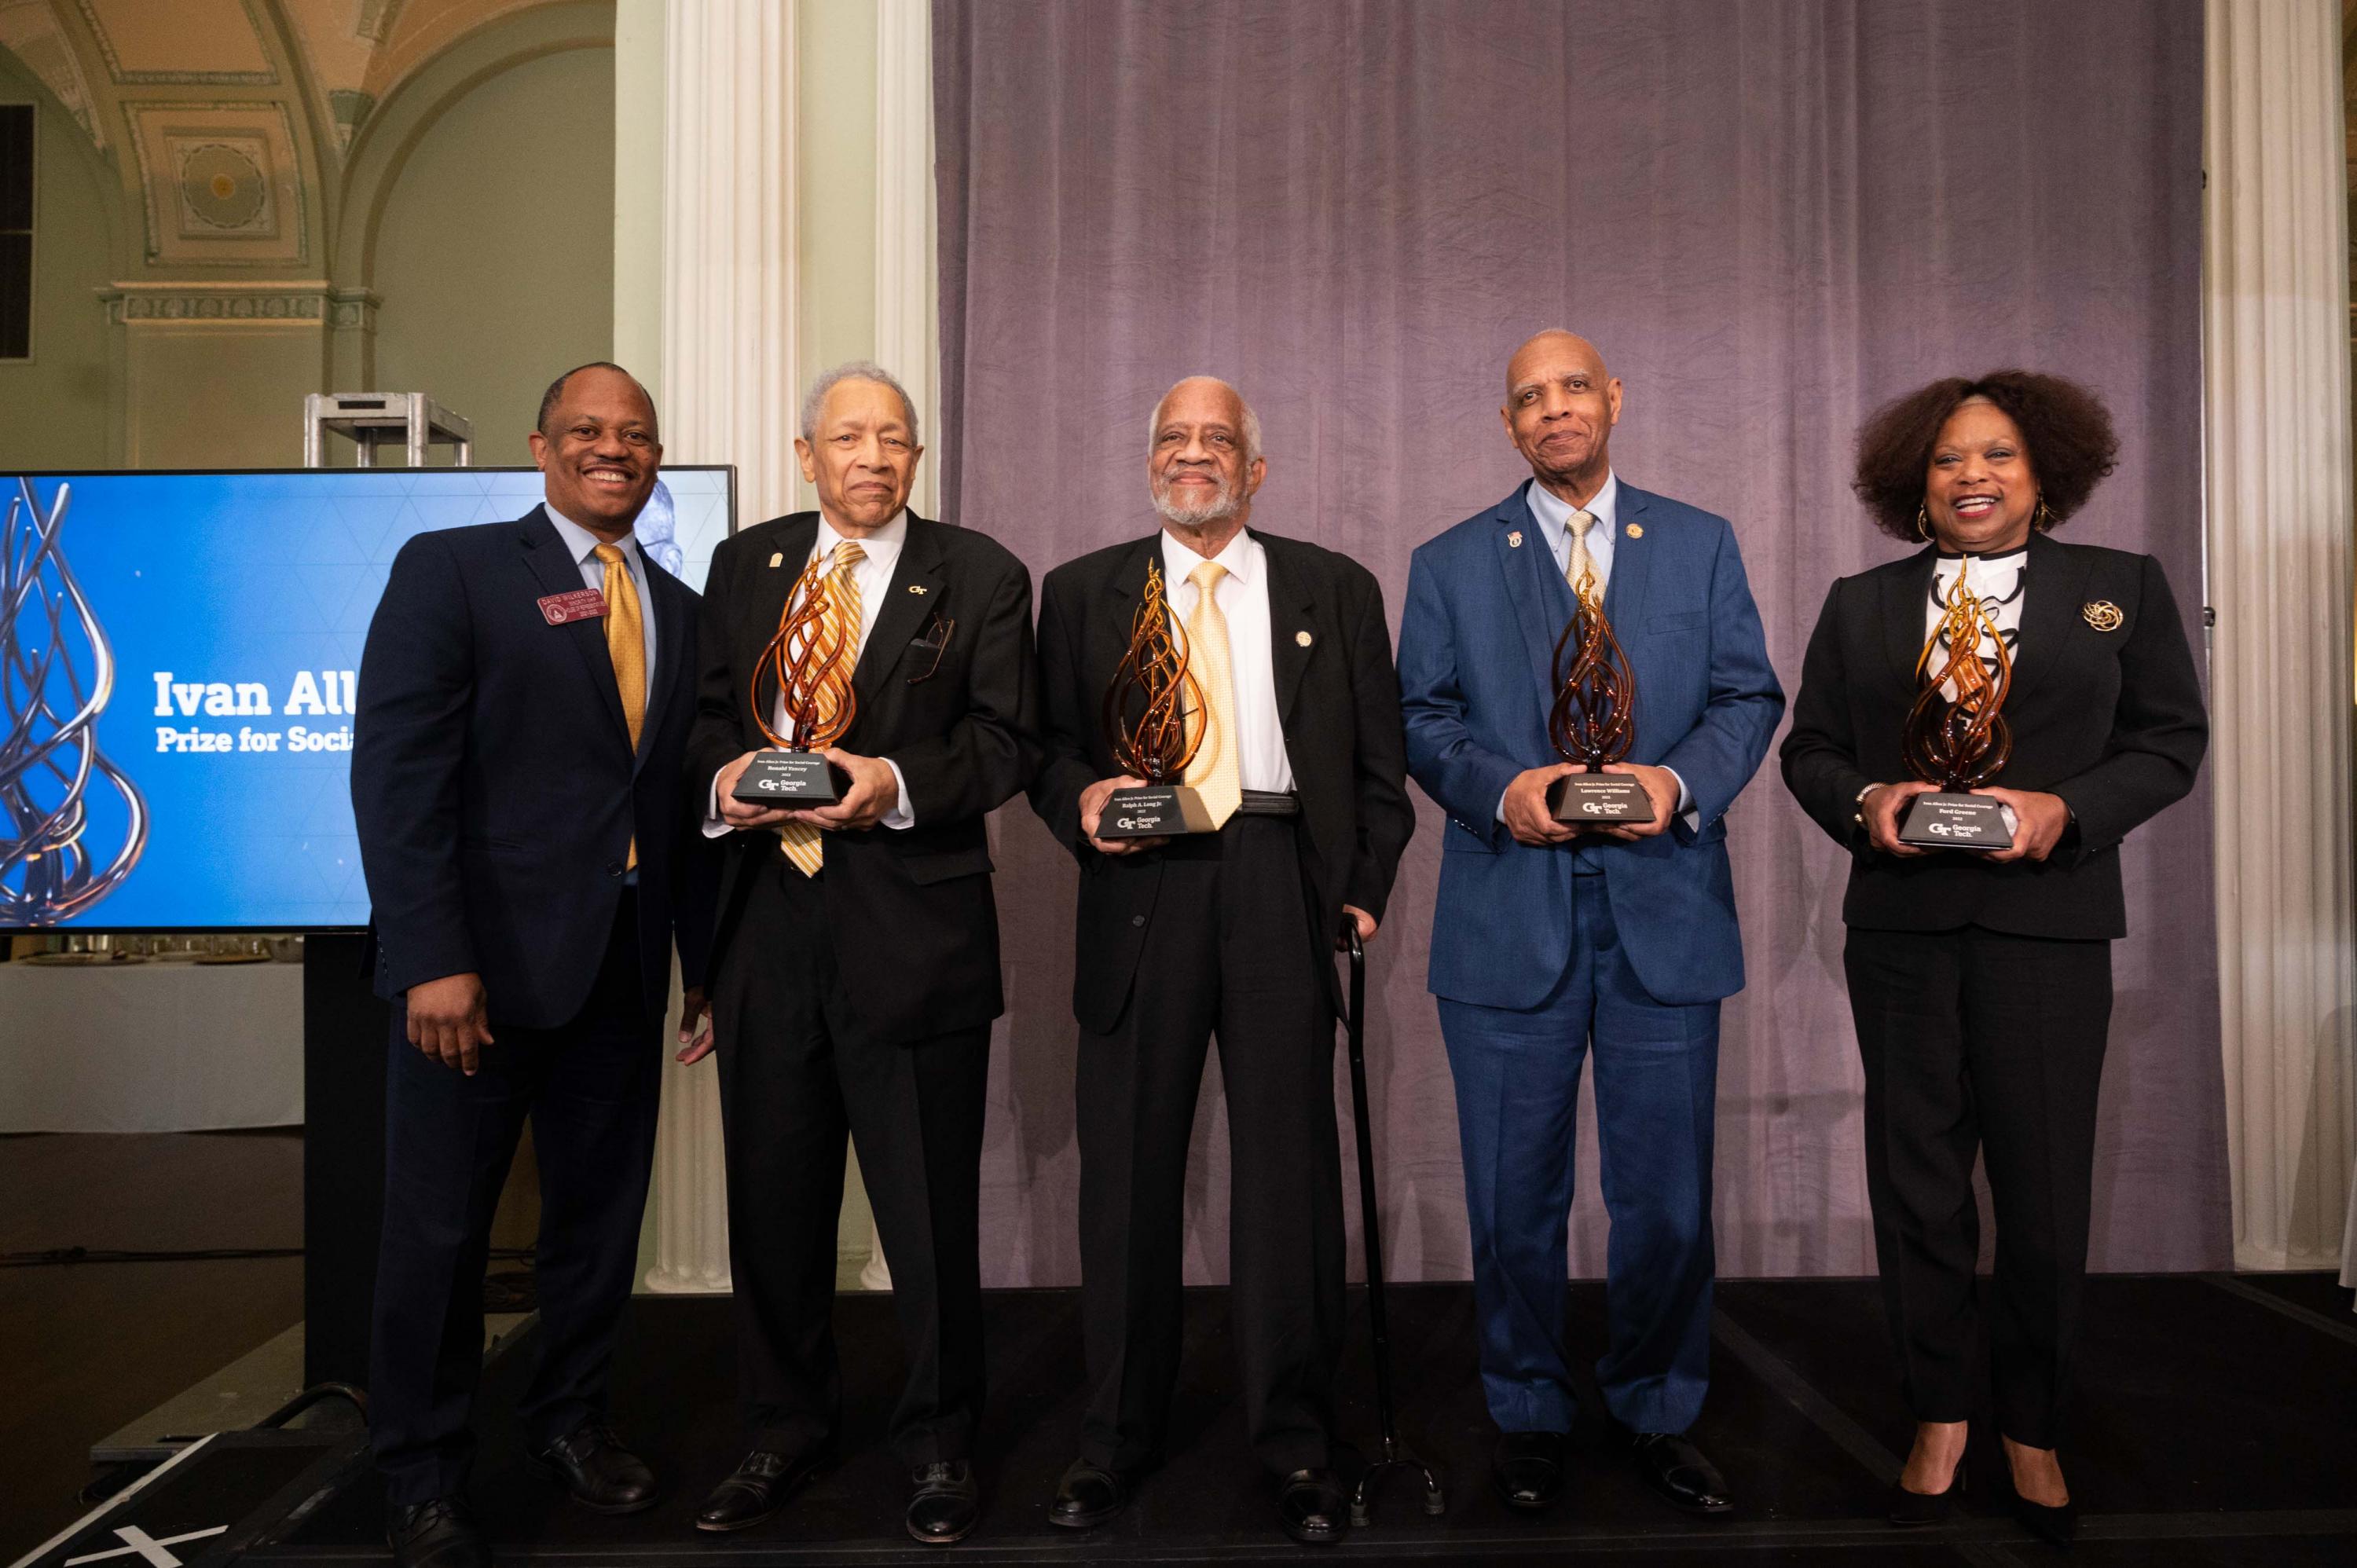 In recognition of their roles as trailblazers, Tech’s first Black students — Lawrence Williams, Ralph Long Jr., and the late Ford Greene, along with the first Black graduate Ronald Yancey — were awarded the 2022 Ivan Allen Jr. Prize for Social Courage on April 20 at the Biltmore Ballroom in Atlanta. 

Pictured left to right: State Rep. David Wilkerson, Ronald Yancey, Ralph Long Jr., Lawrence Williams, and Frankie Hall, wife of the late Ford C. Greene.